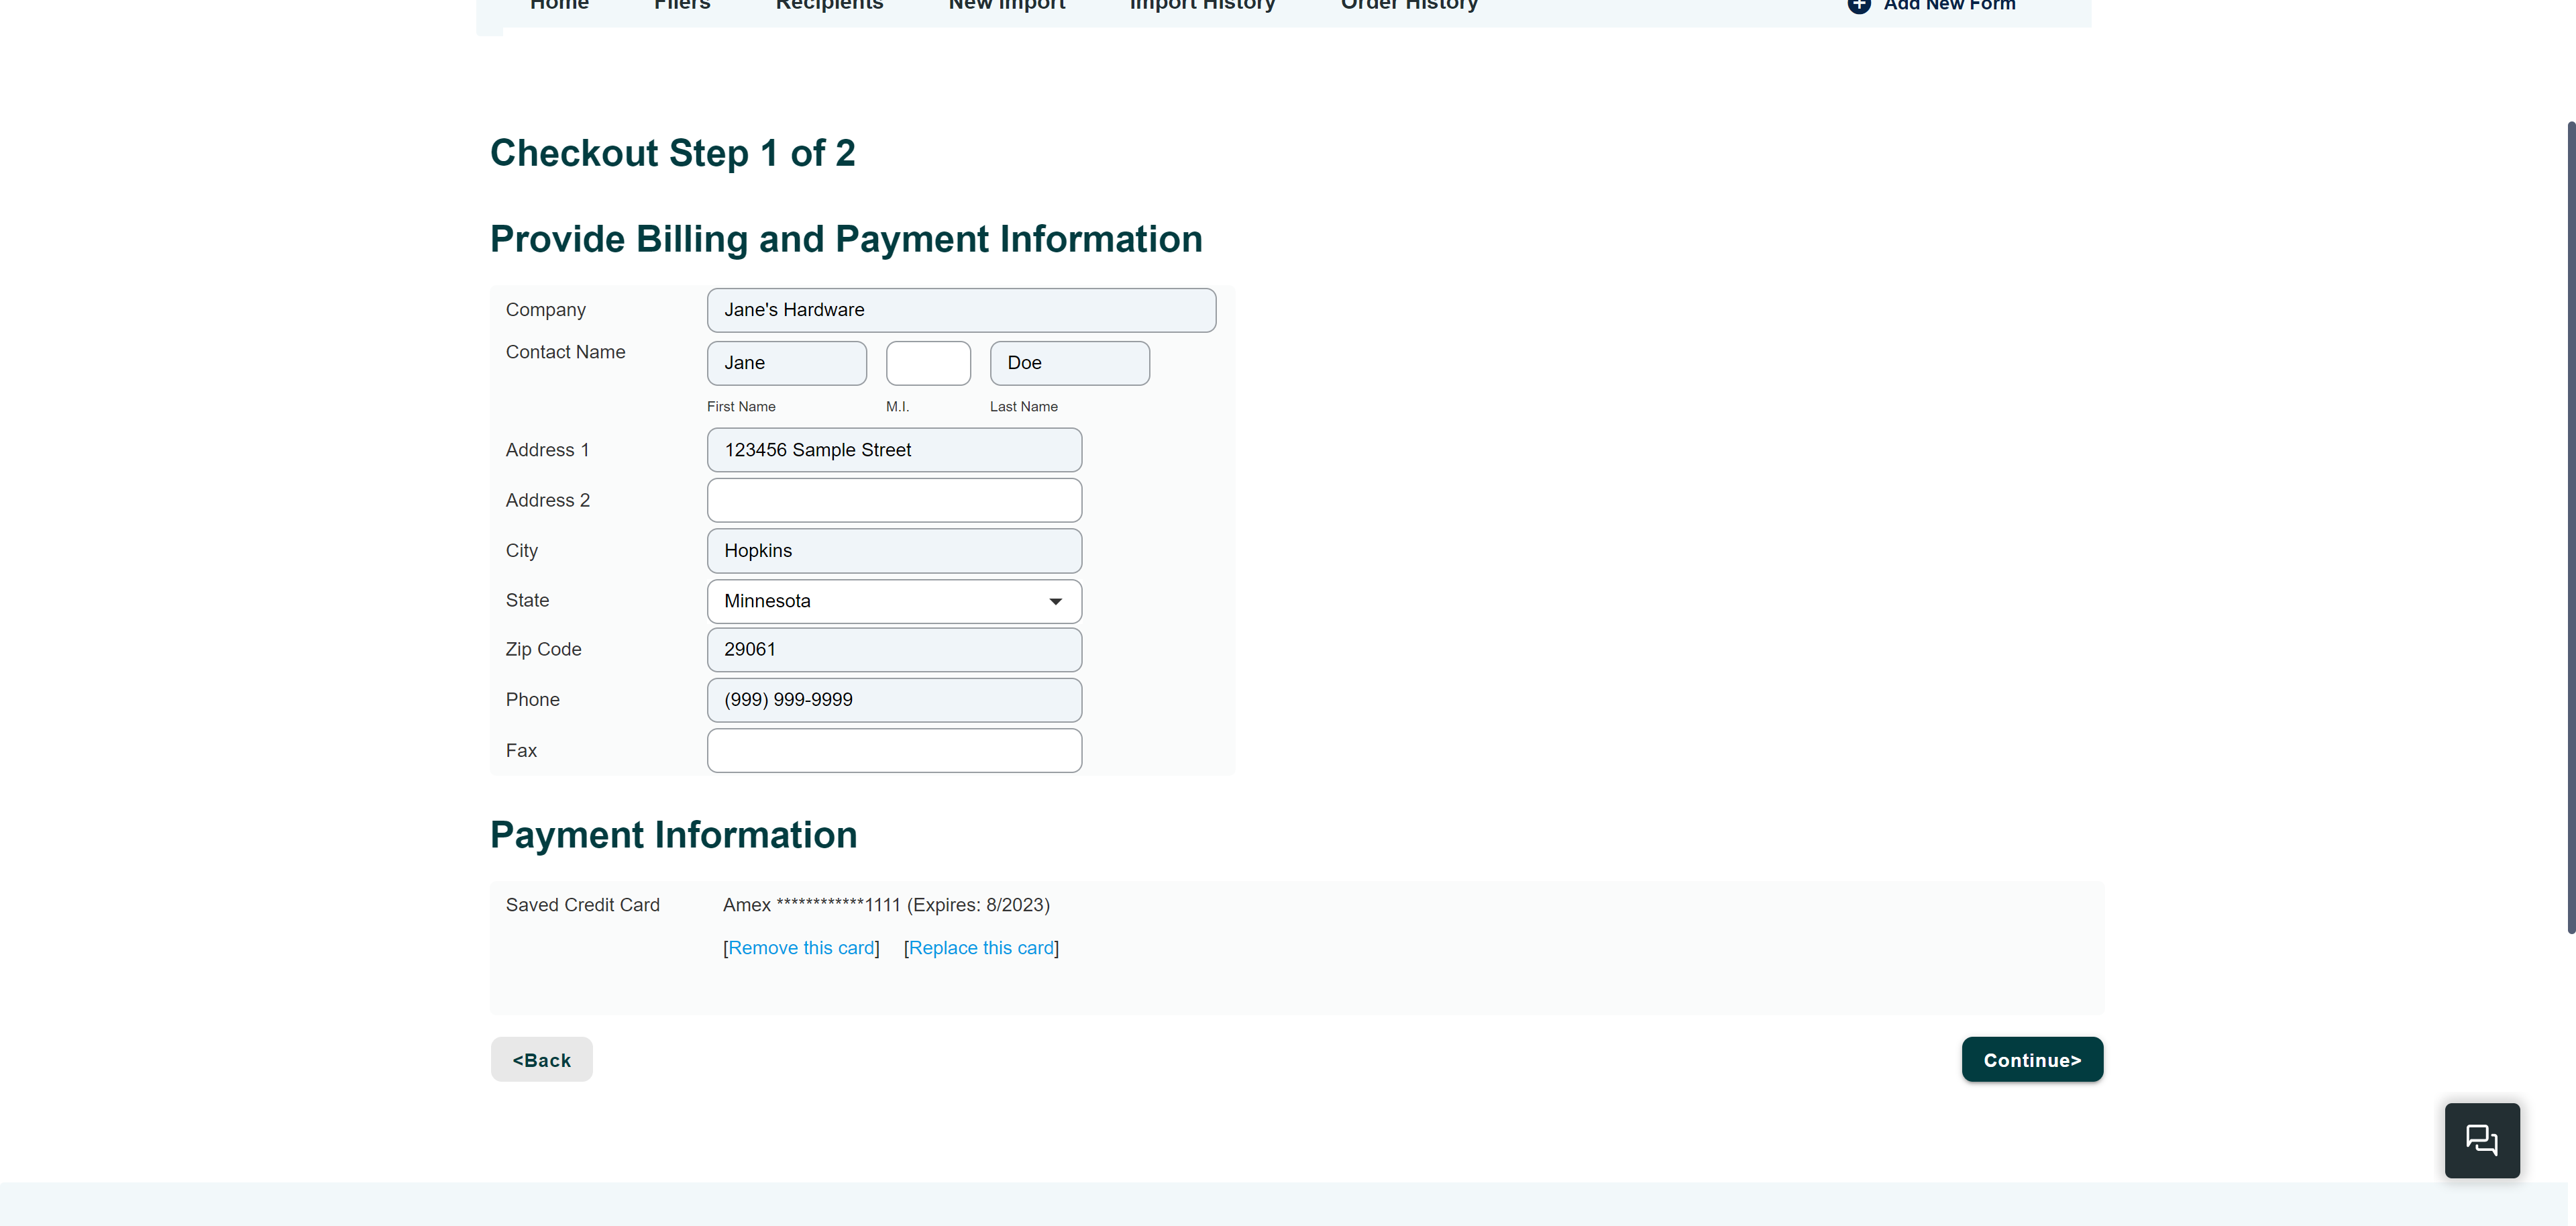 Image of the Checkout page.